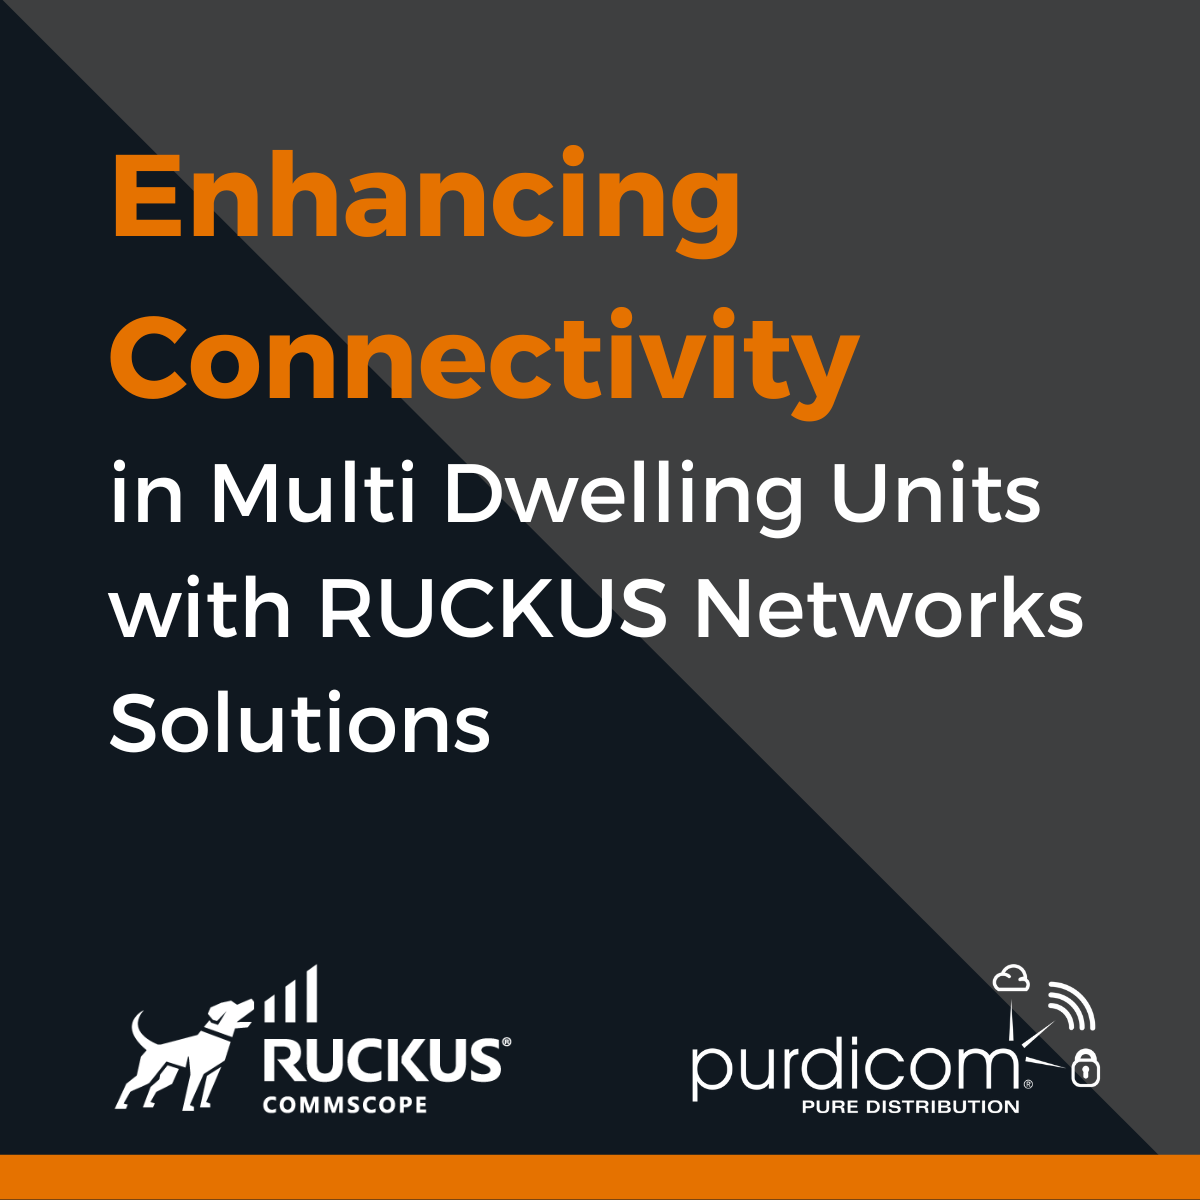 RUCKUS Networks Solutions: Enhancing Connectivity in Multi Dwelling Units